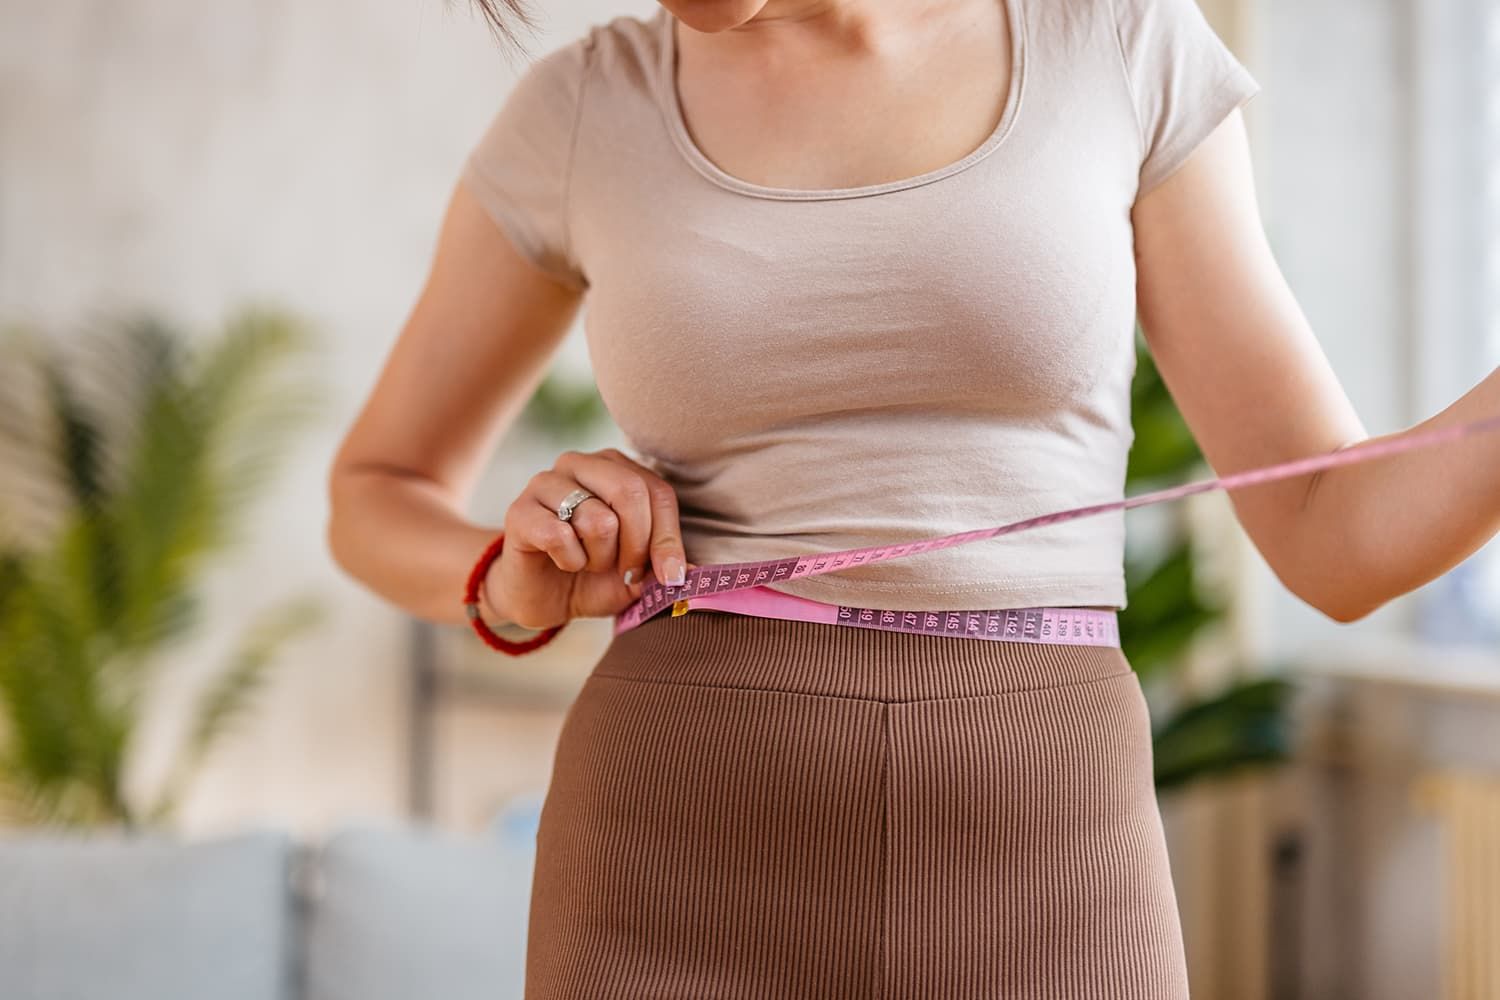 Woman measures waist for healthy weight loss with semaglutide